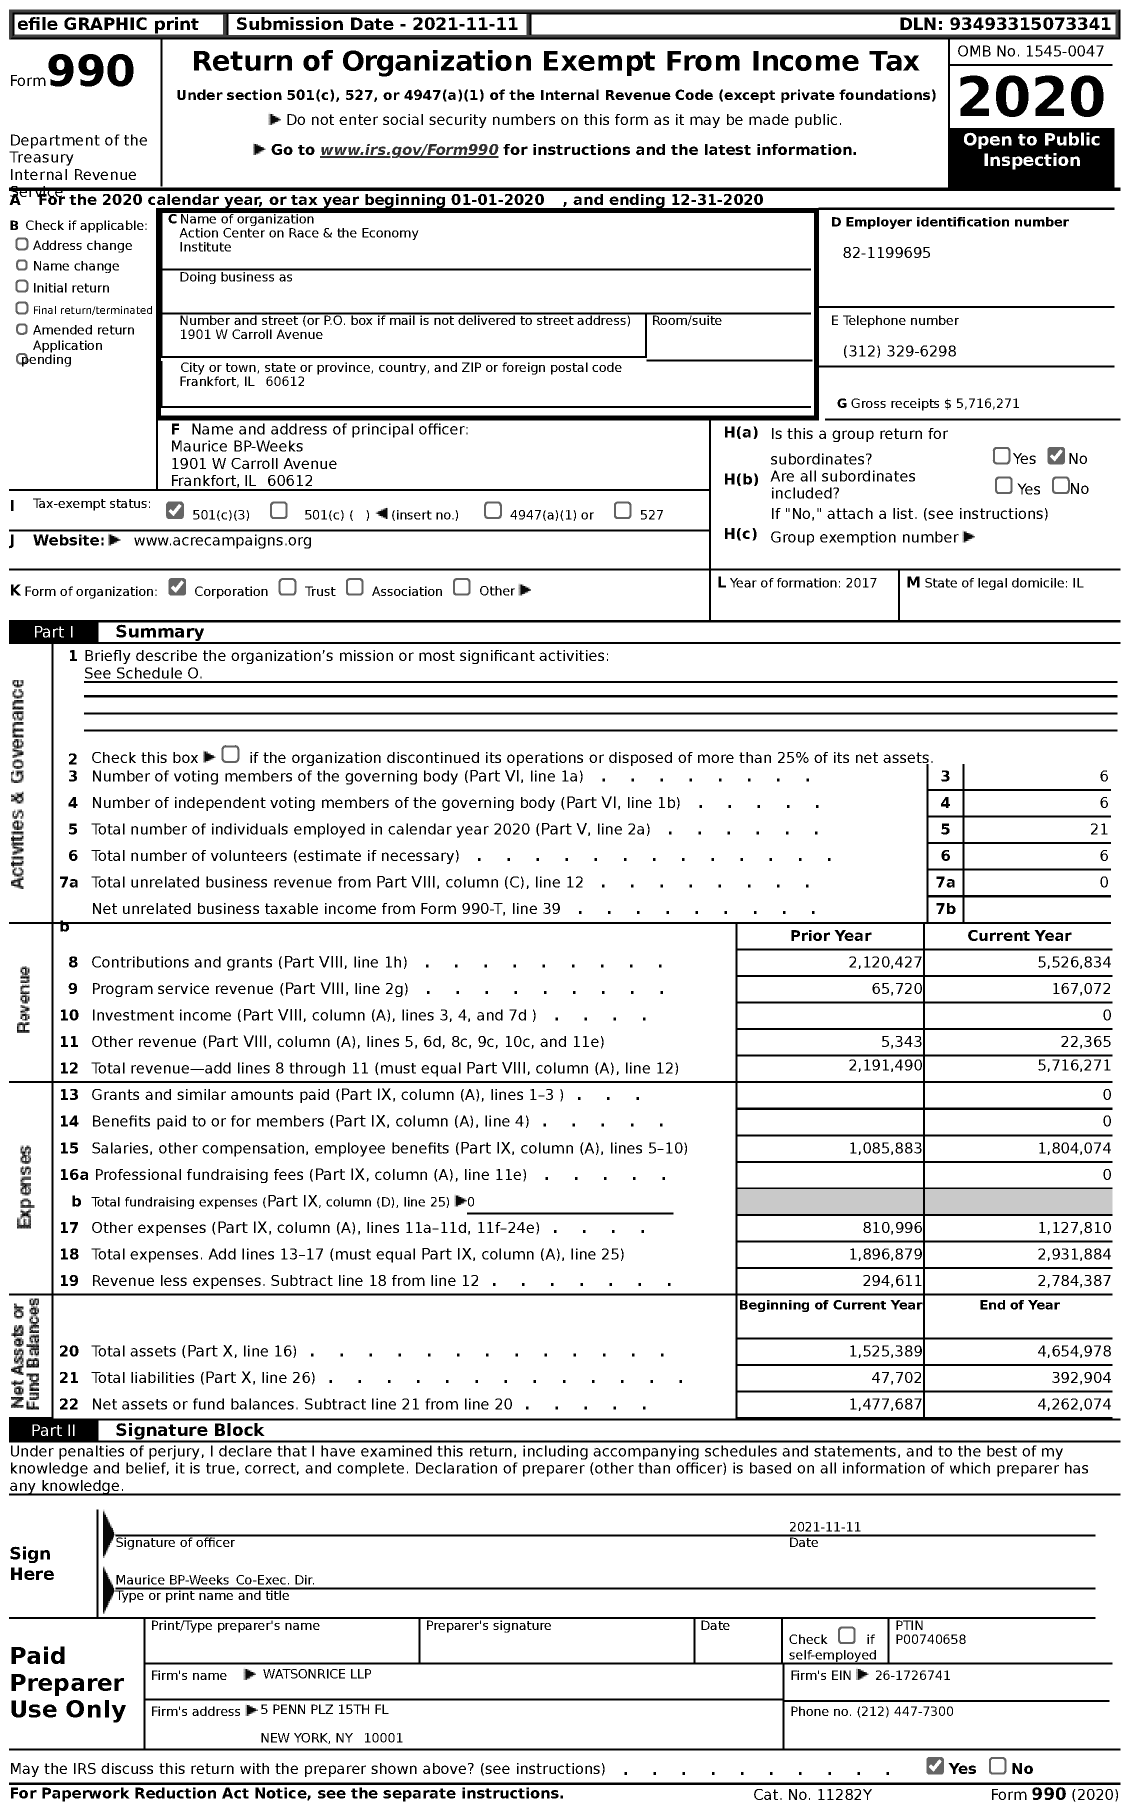 Image of first page of 2020 Form 990 for Action Center on Race & the Economy Institute